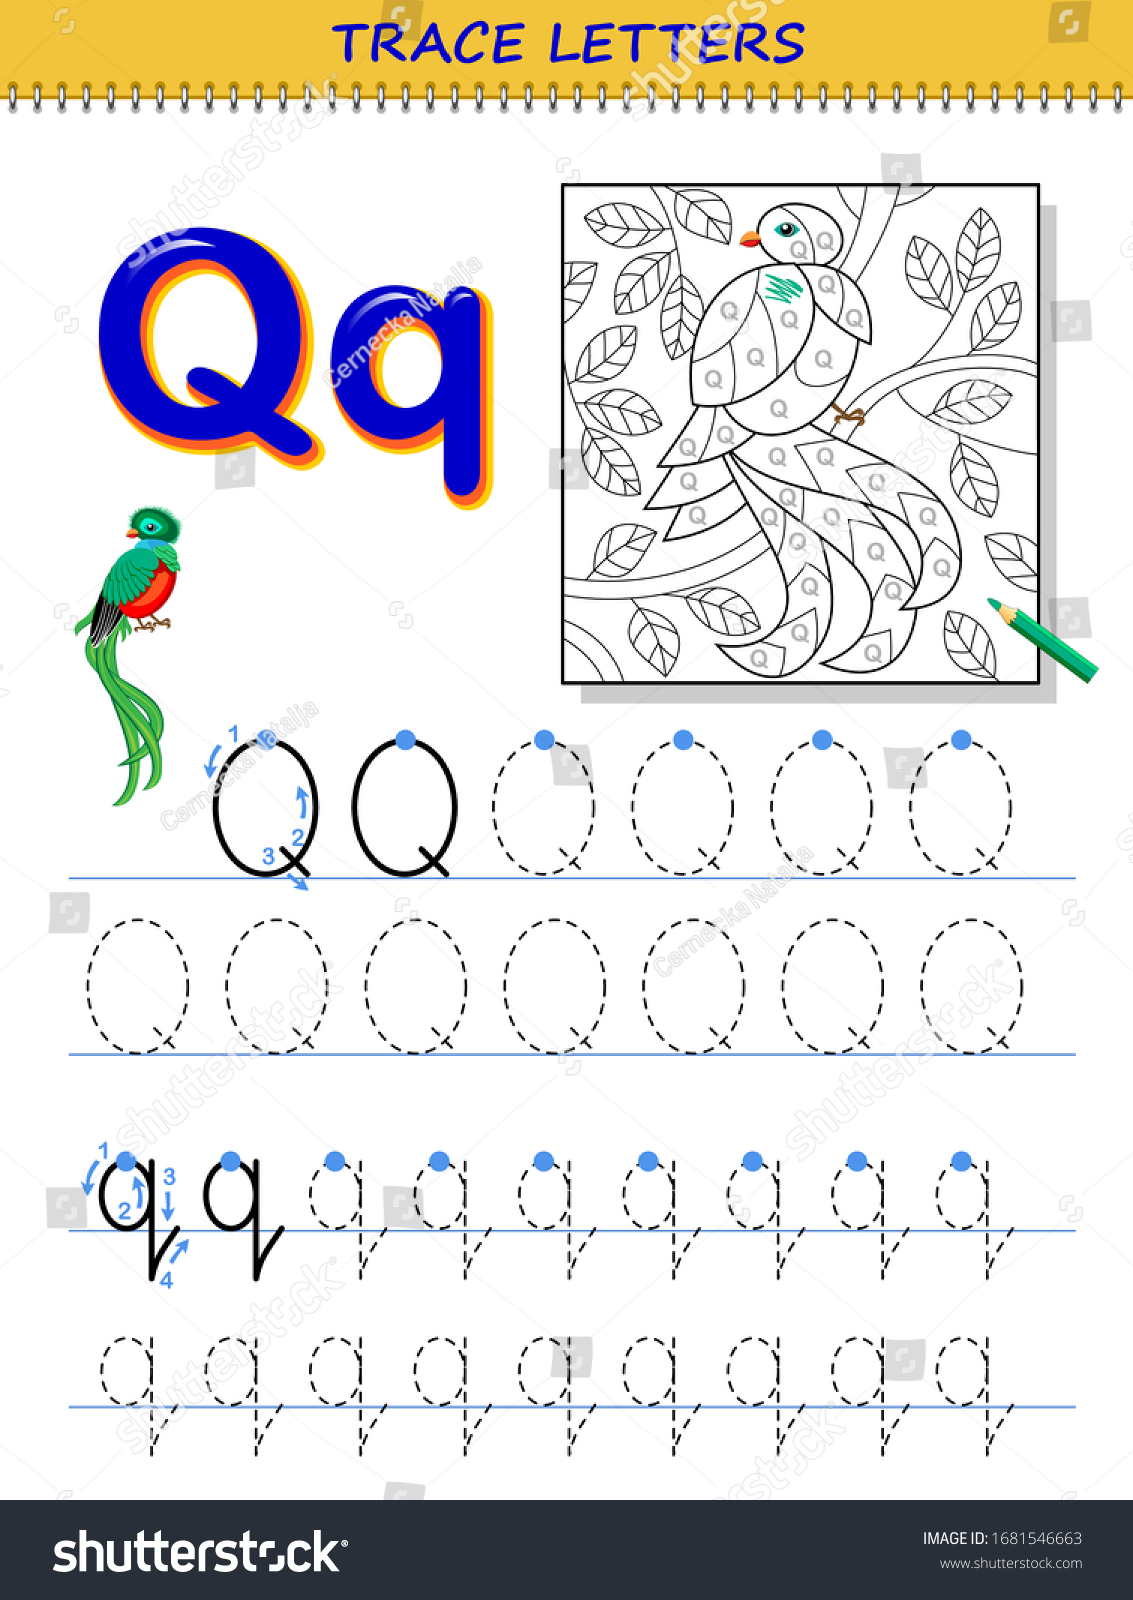 Tracing letter q study alphabet printable stock vector royalty free